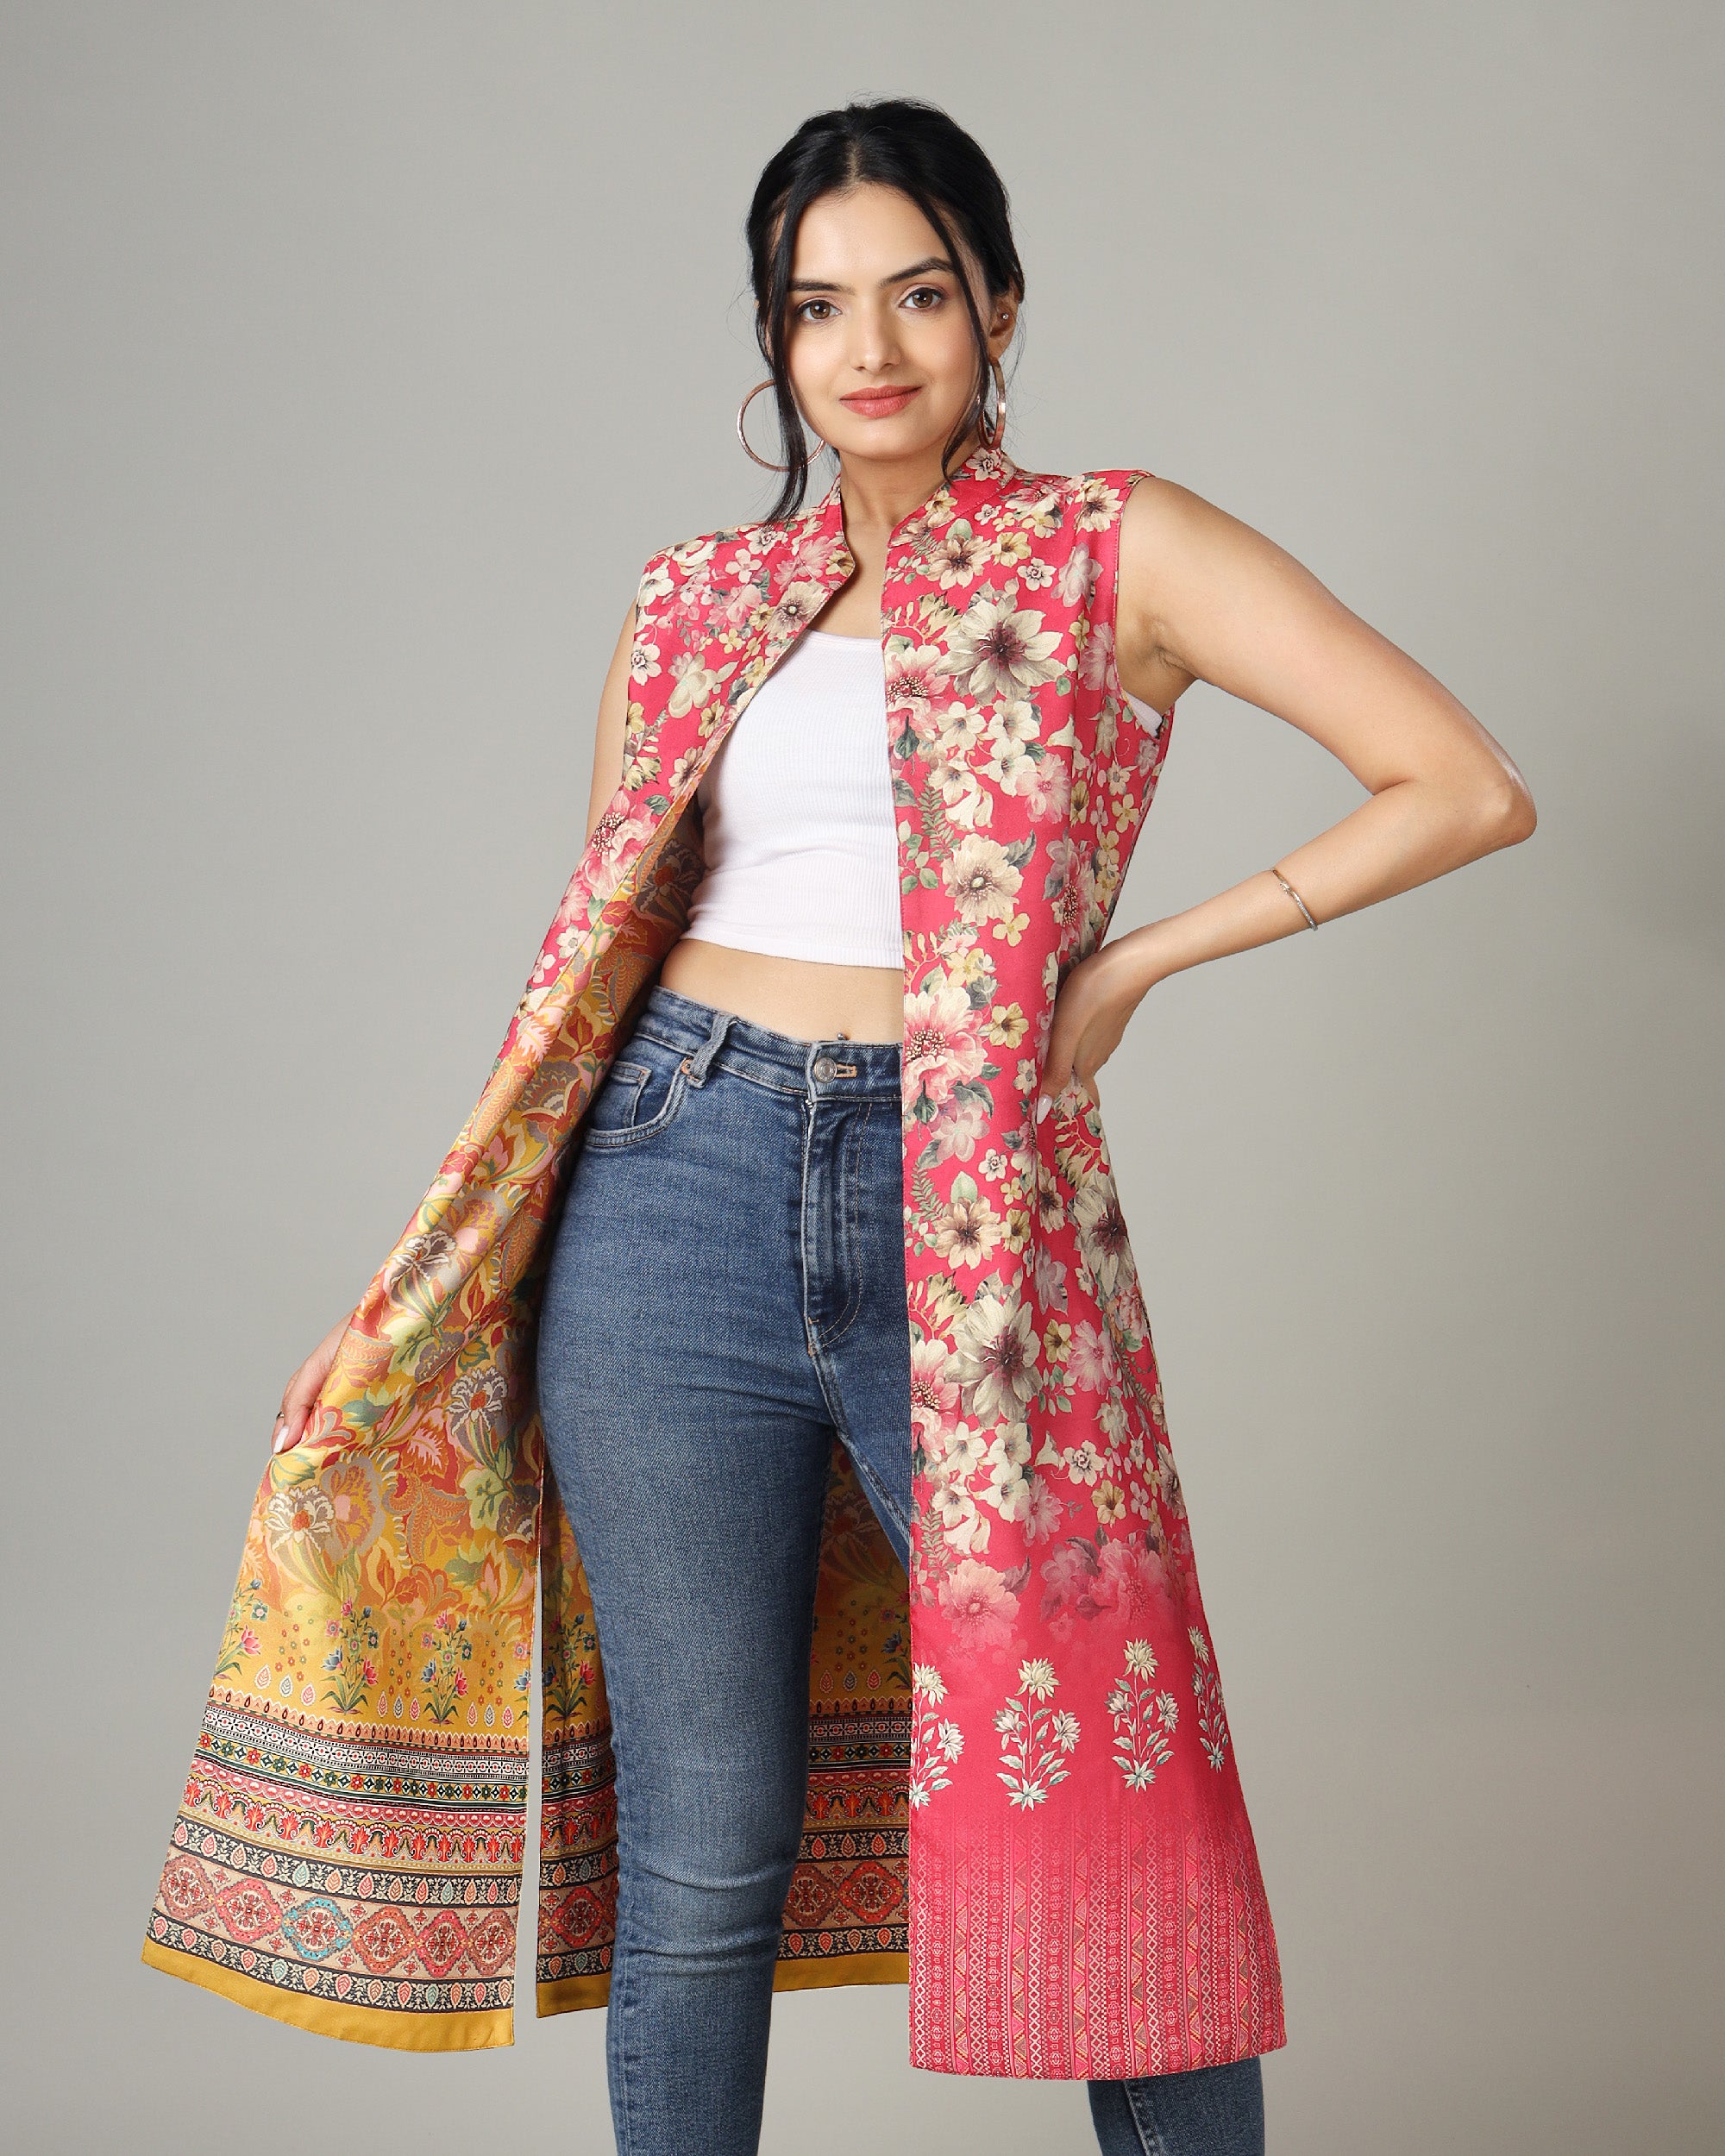 Buy Red Sheer Silk Veni Floral Print Jacket For Women by Aseem Kapoor Online  at Aza Fashions. | Modest fashion outfits, Draping fashion, Ethnic fashion  indian